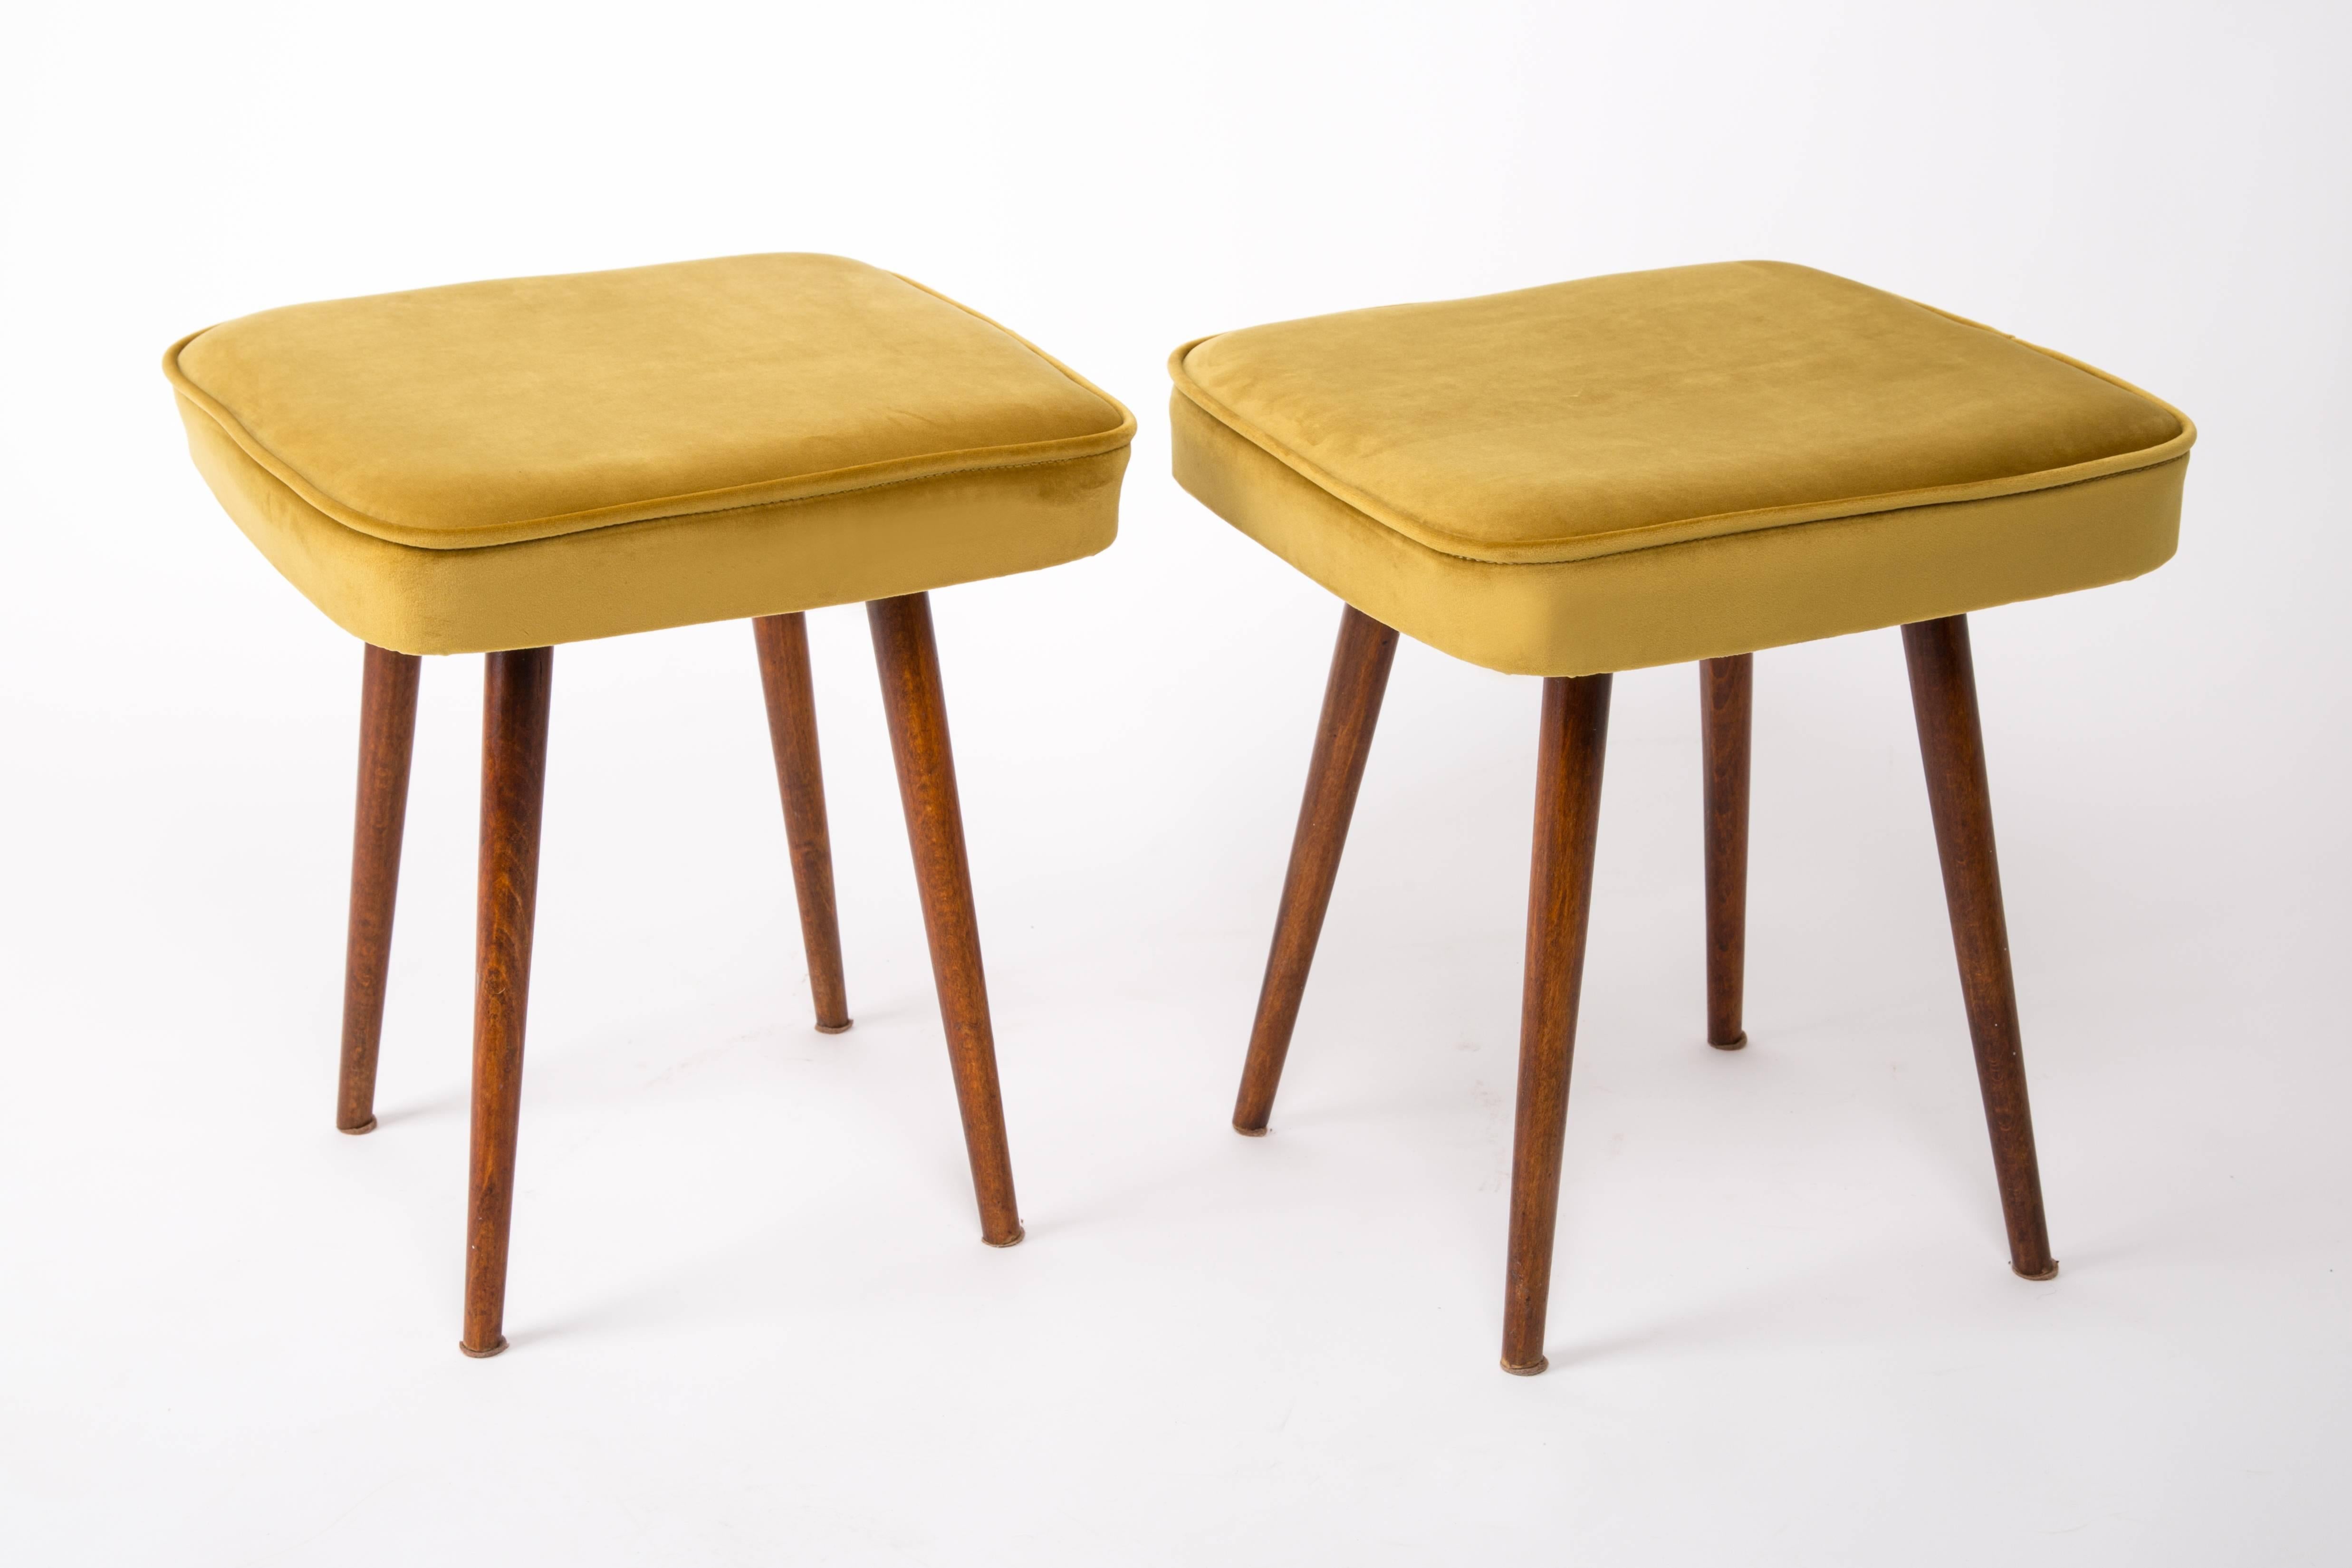 Stool from the turn of the 1960s and 1970s. Beautiful mustard velor upholstery. The stool consists of an upholstered part, a seat and wooden legs narrowing downwards, characteristic of the 1960s style. We can prepare this pair also in another color